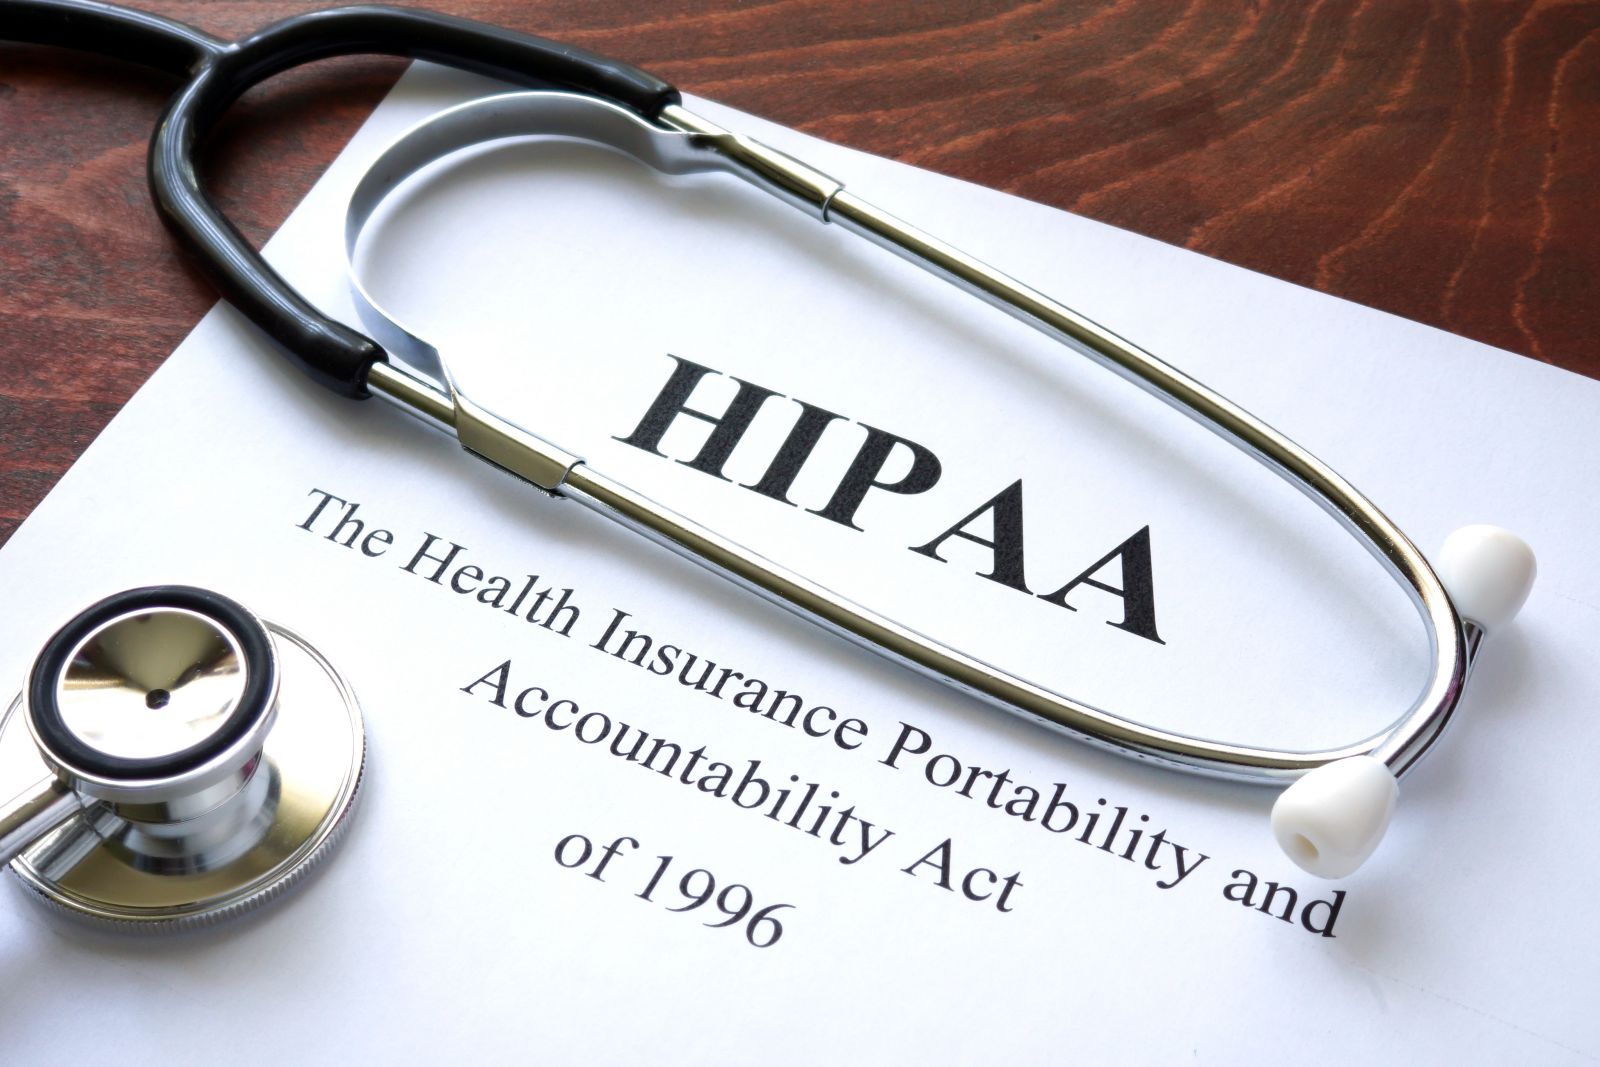 HIPAA Notice of Privacy Practices